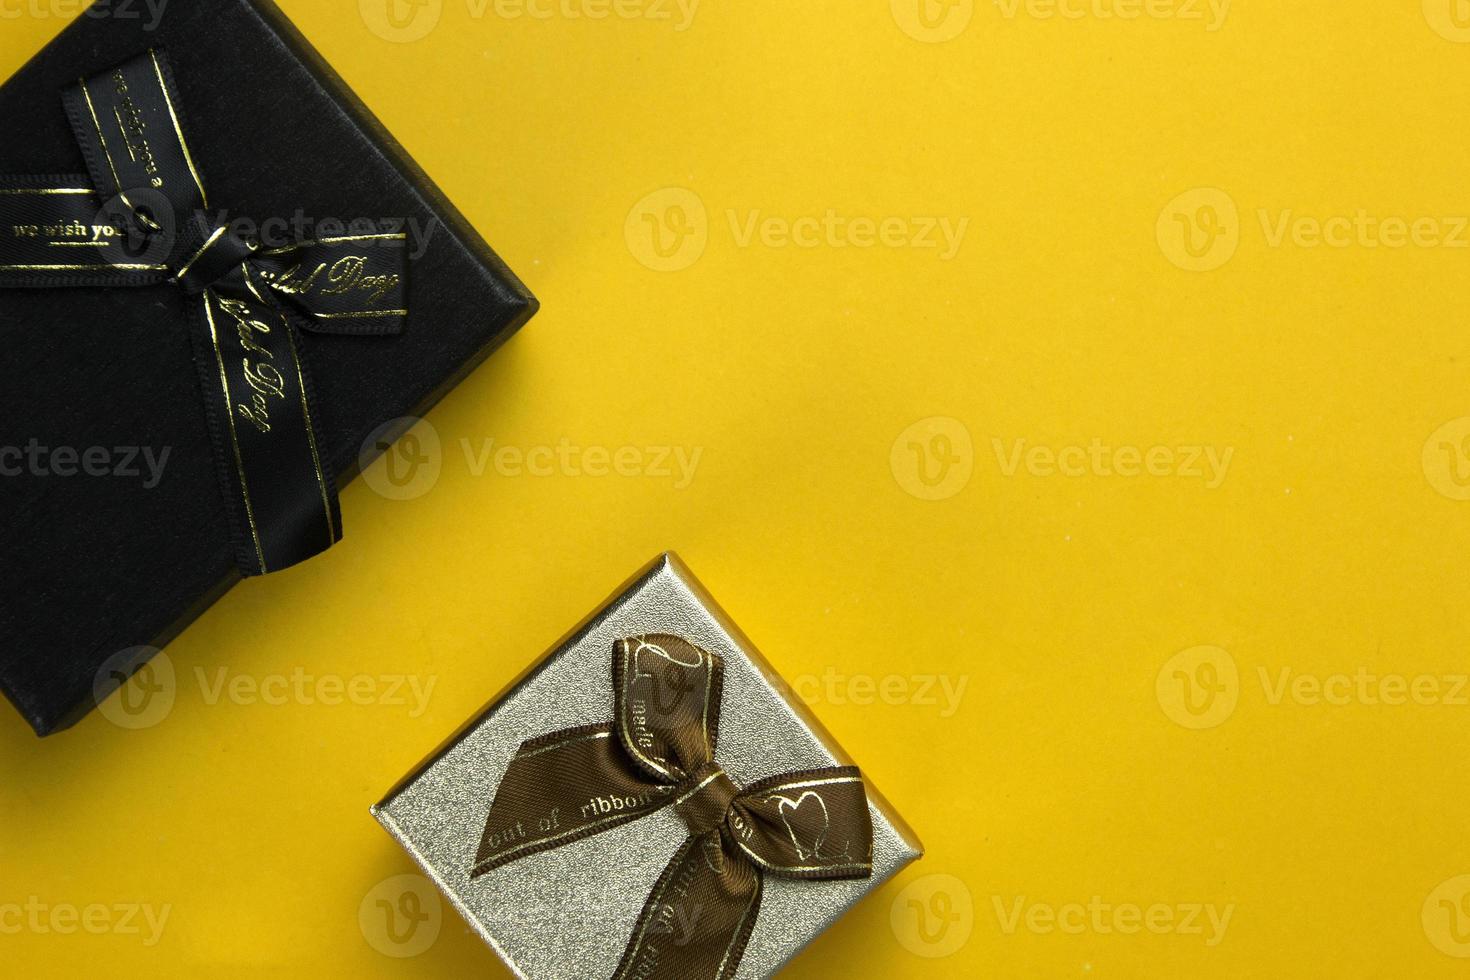 New Year and Christmas gift boxes concept for giving on special Occasion, Realistic  gifts boxes on yellow background top view anglr, usage of decorative festive object. Holiday banner. photo